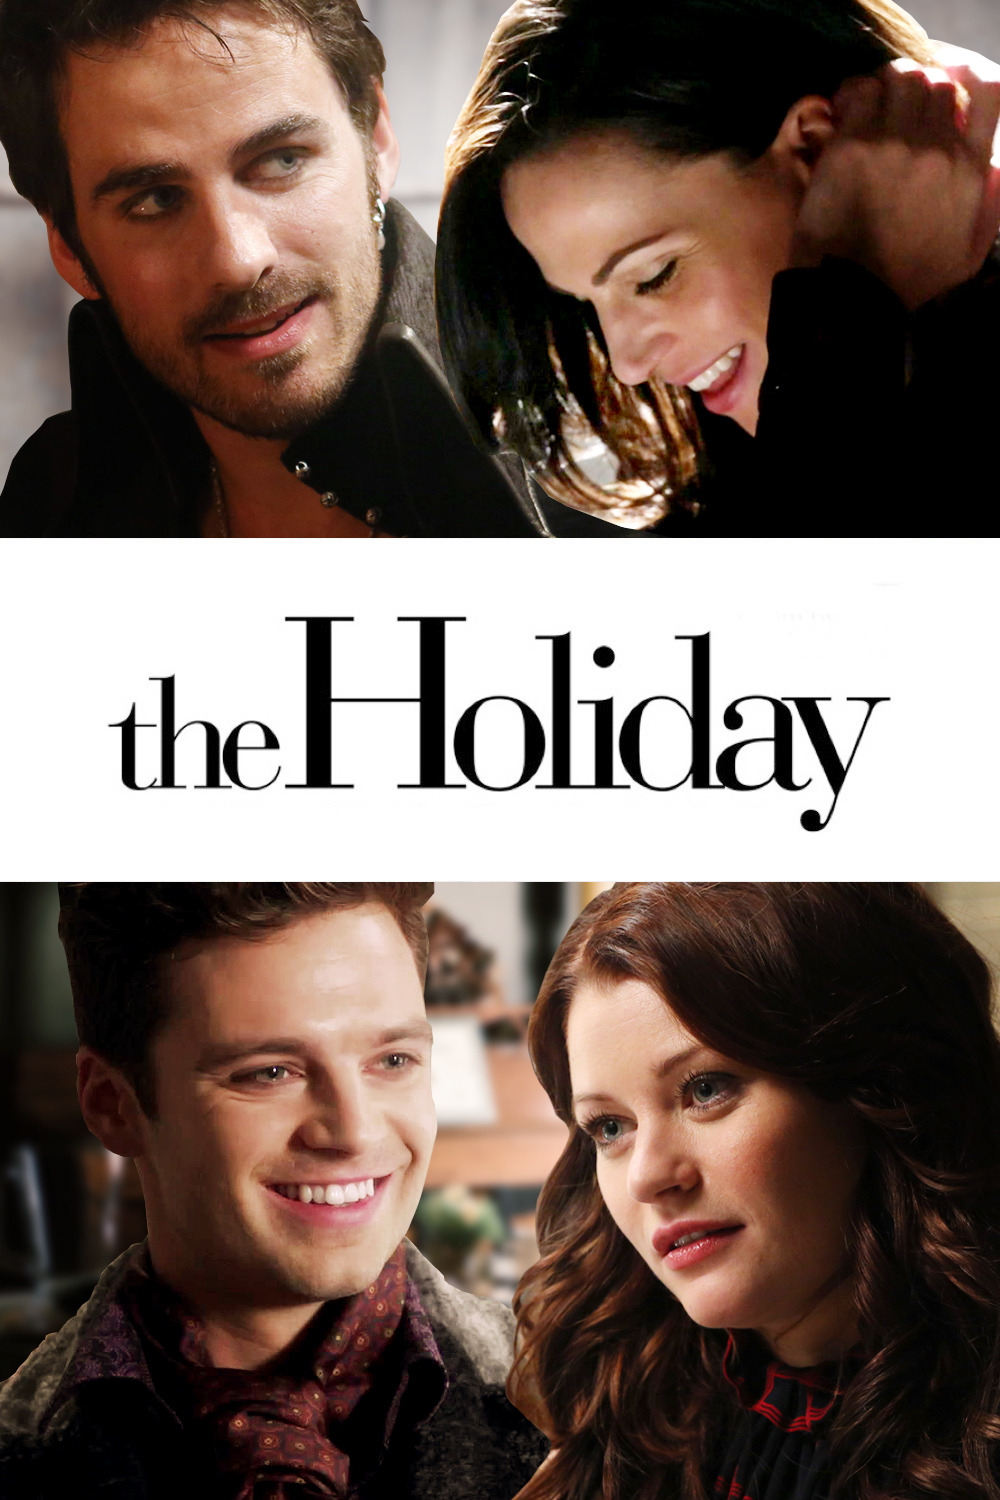 boleyngirl39:
“ heatherfield:
“ “Belle French and Regina Mills, both feeling frustrated with where their lives have taken them, decide to swap houses for the holidays, only to discover that their plans for a male-free Christmas might not work out...